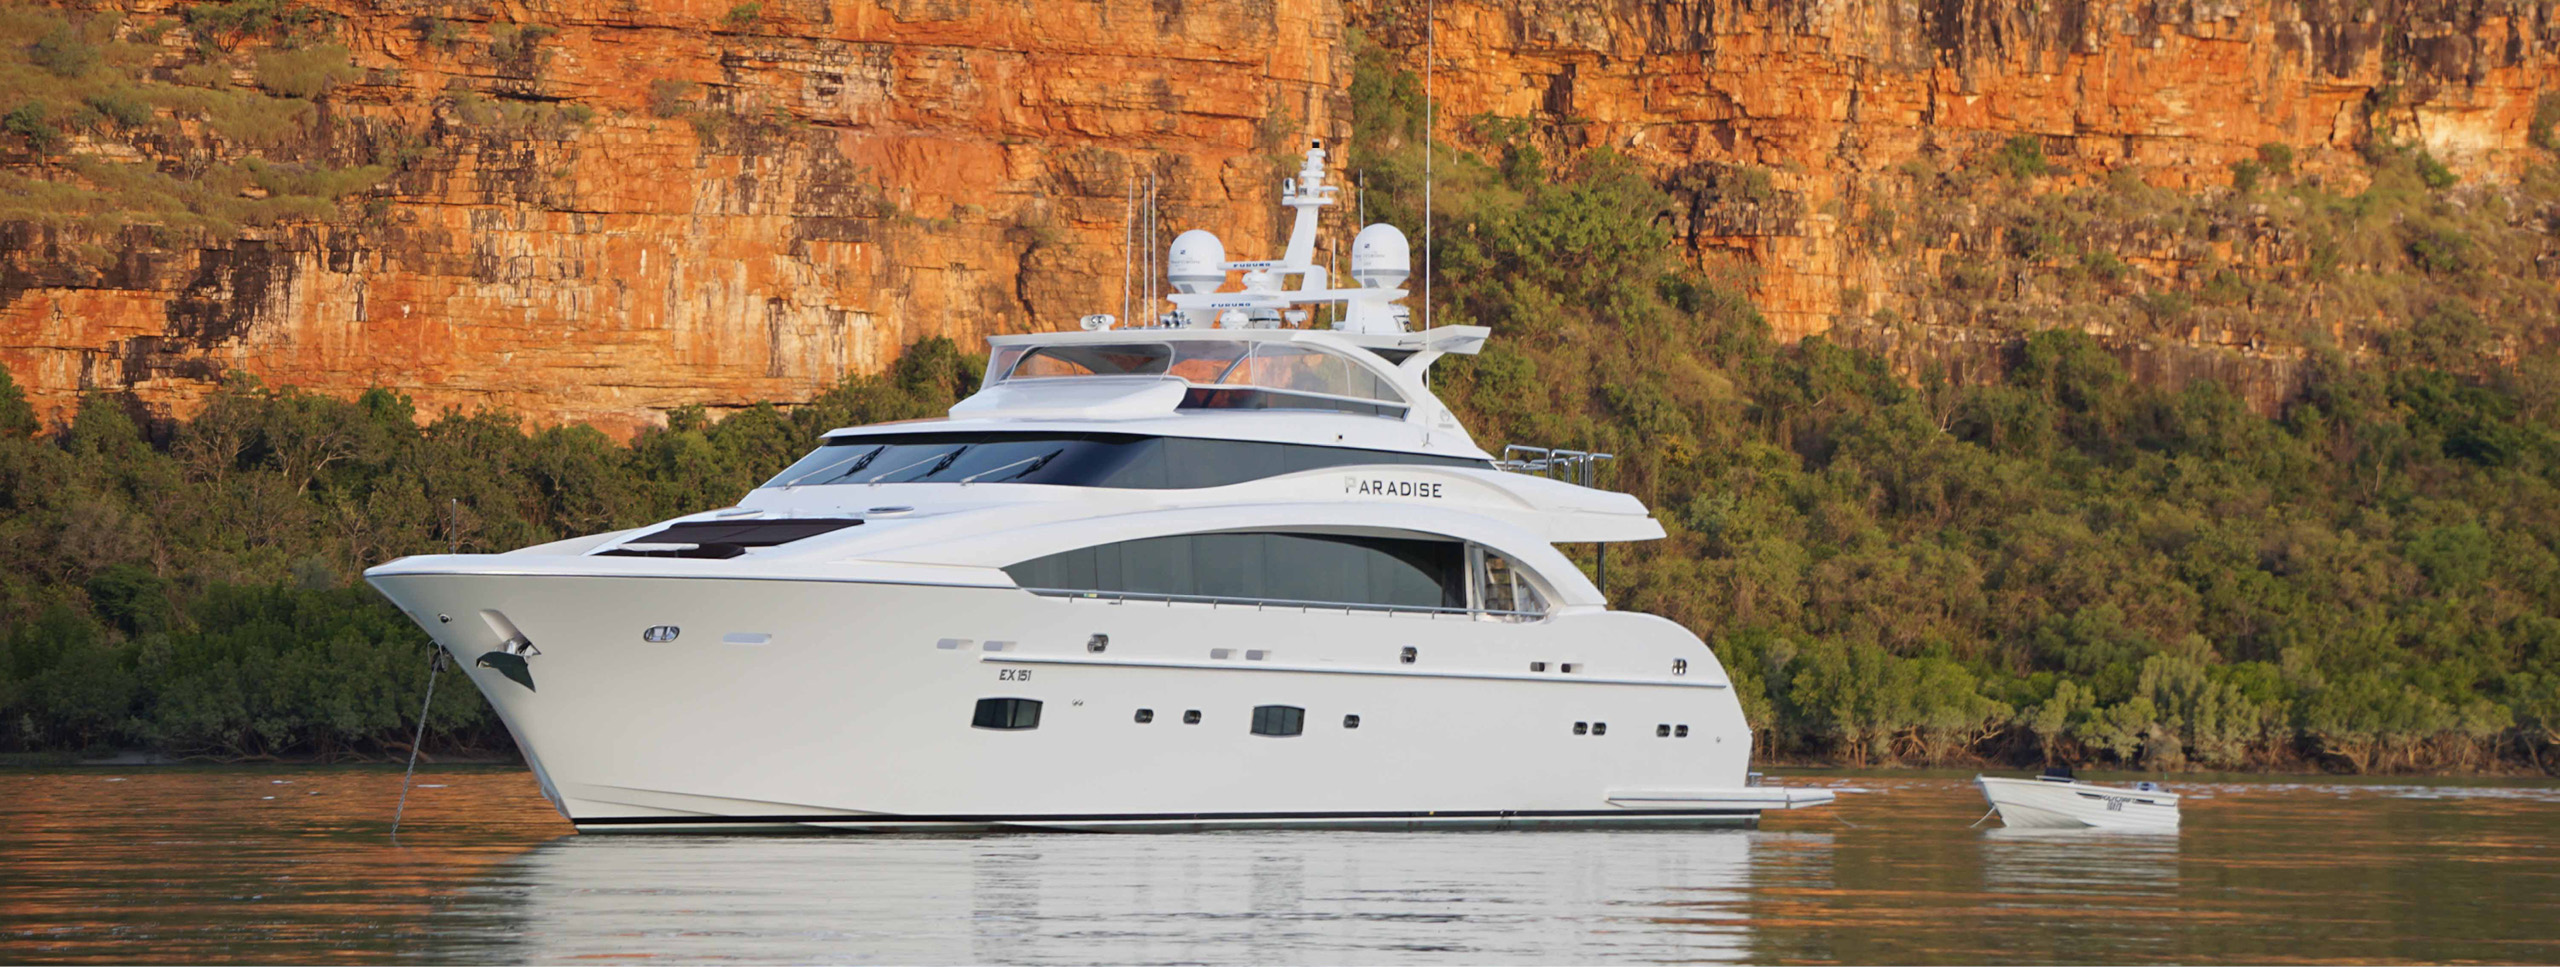 yacht for sale in perth